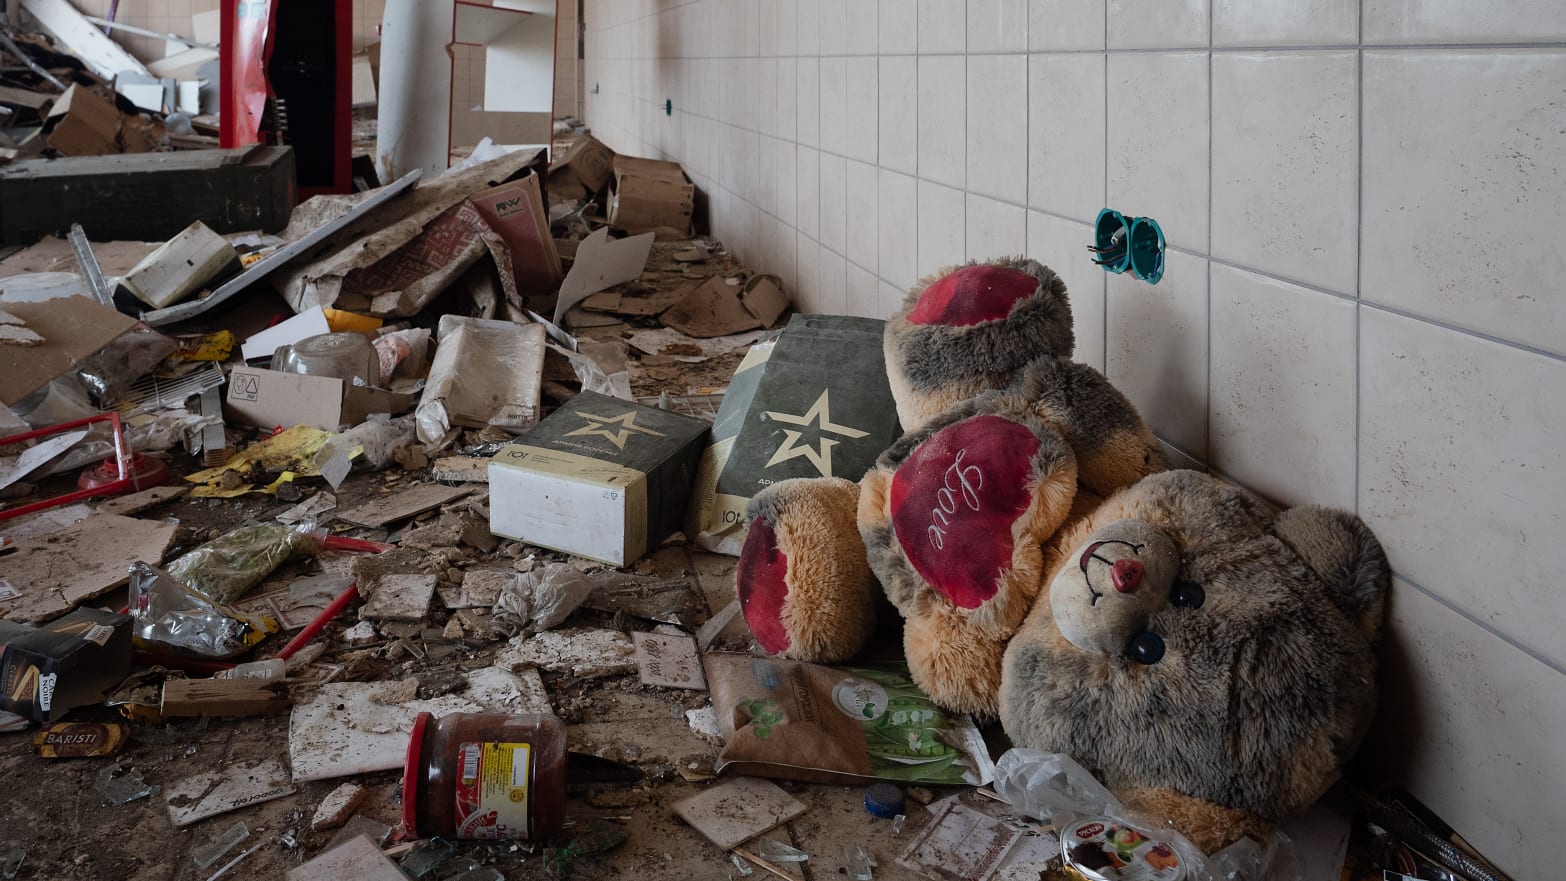 A food store on the central square of Trostyanets, Ukraine, after being completely looted by Russian and separatist soldiers, April 22, 2022.